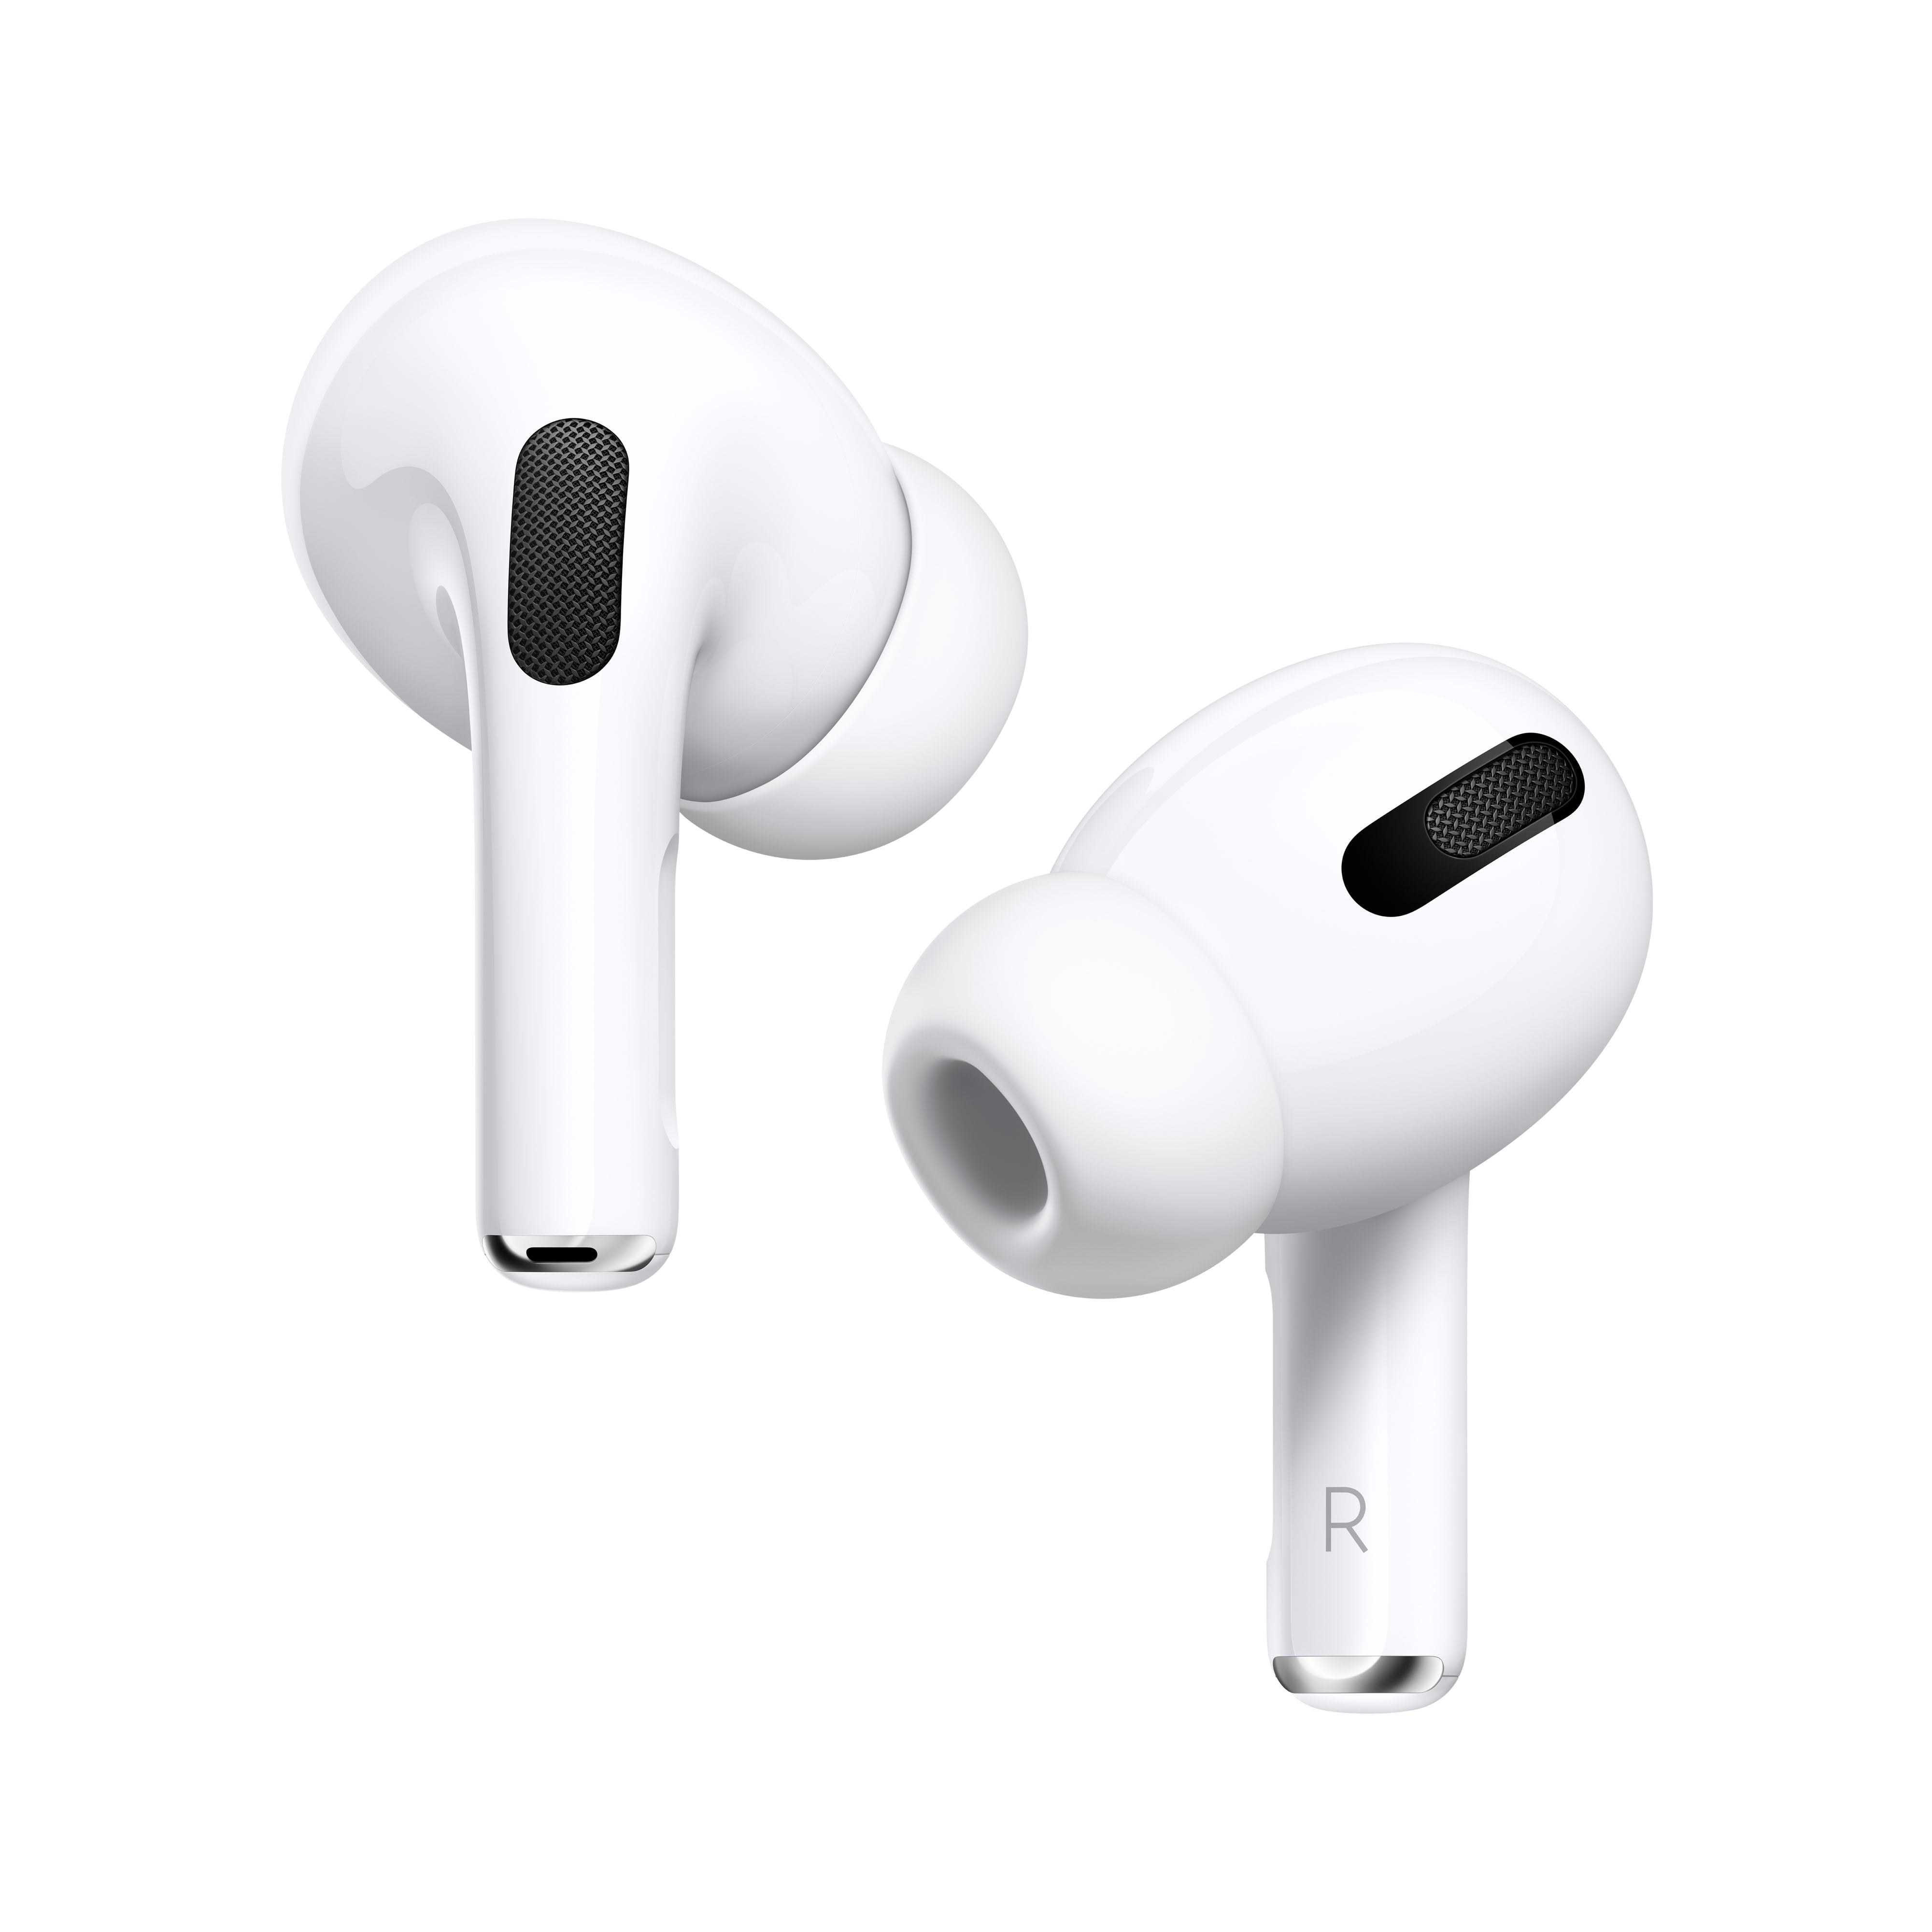 T Calm I am sick Apple AirPods Pro with MagSafe Charging Case (1st Generation) - Walmart.com